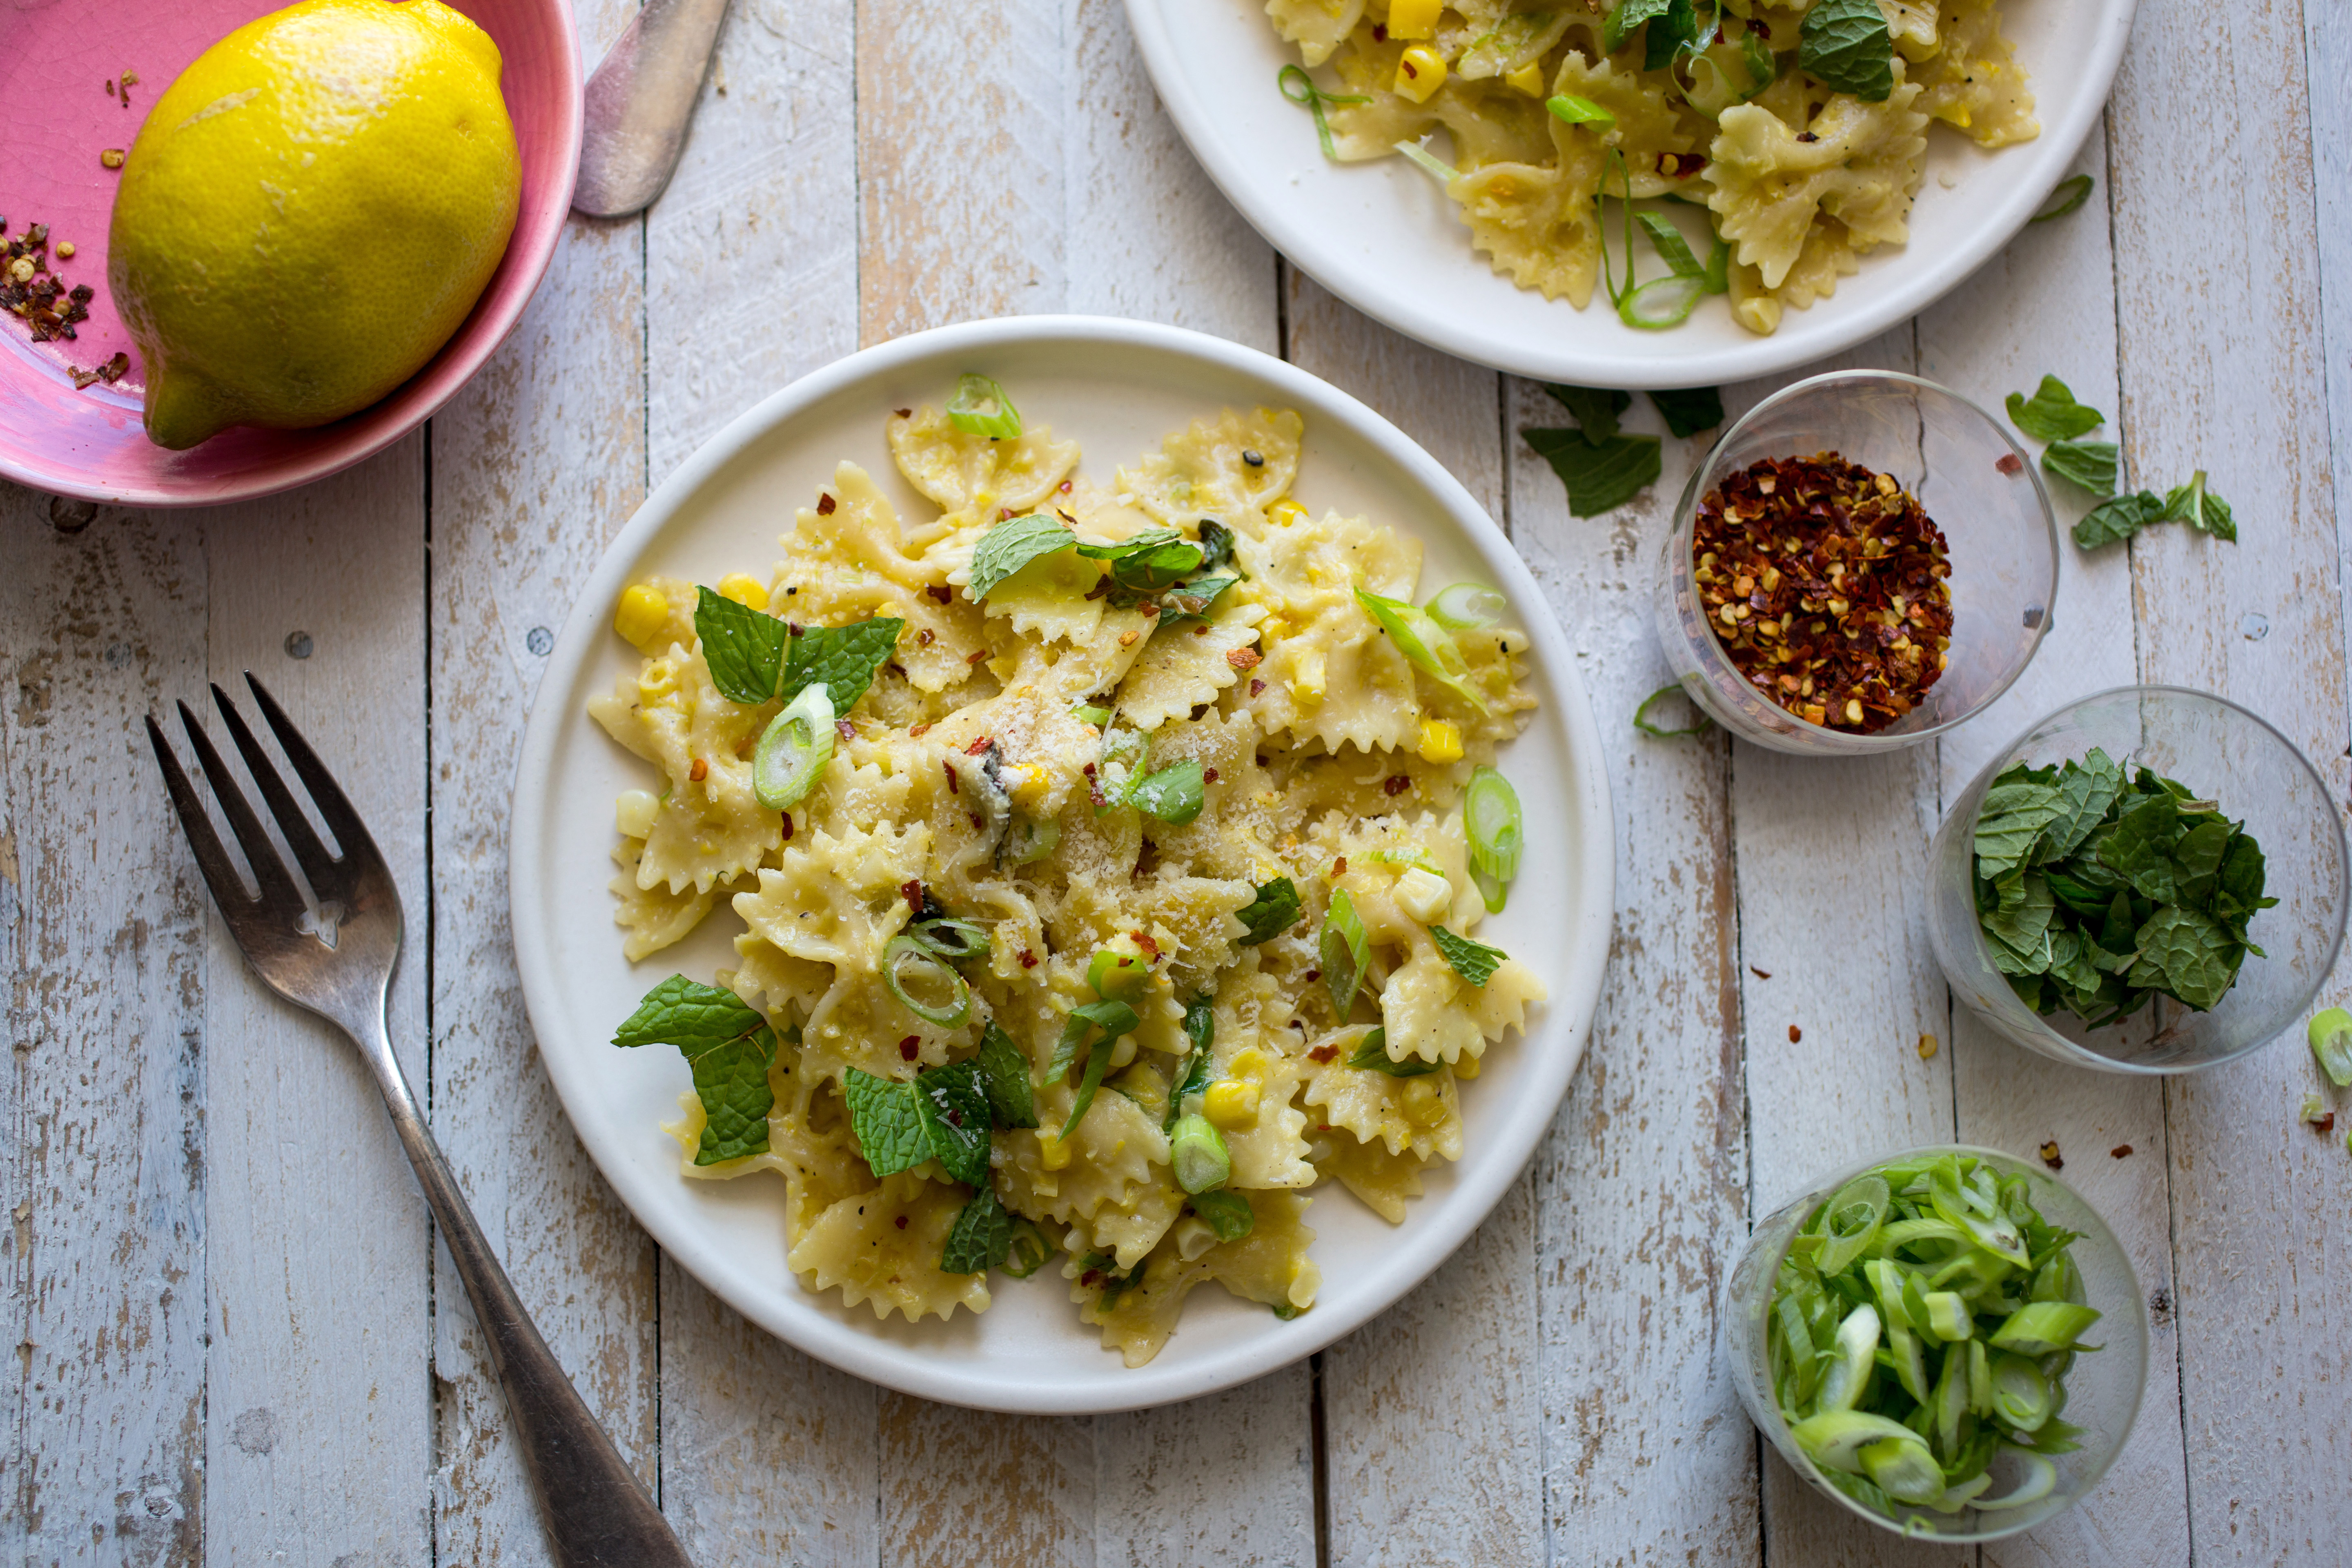 APPETITE, Creamy Corn Pasta, When it's done right, food photography can be a truly gorgeous art form -- and a big part of good execution are props and plating. Learn more from Andrew Scrivani on the CreativeLive blog.